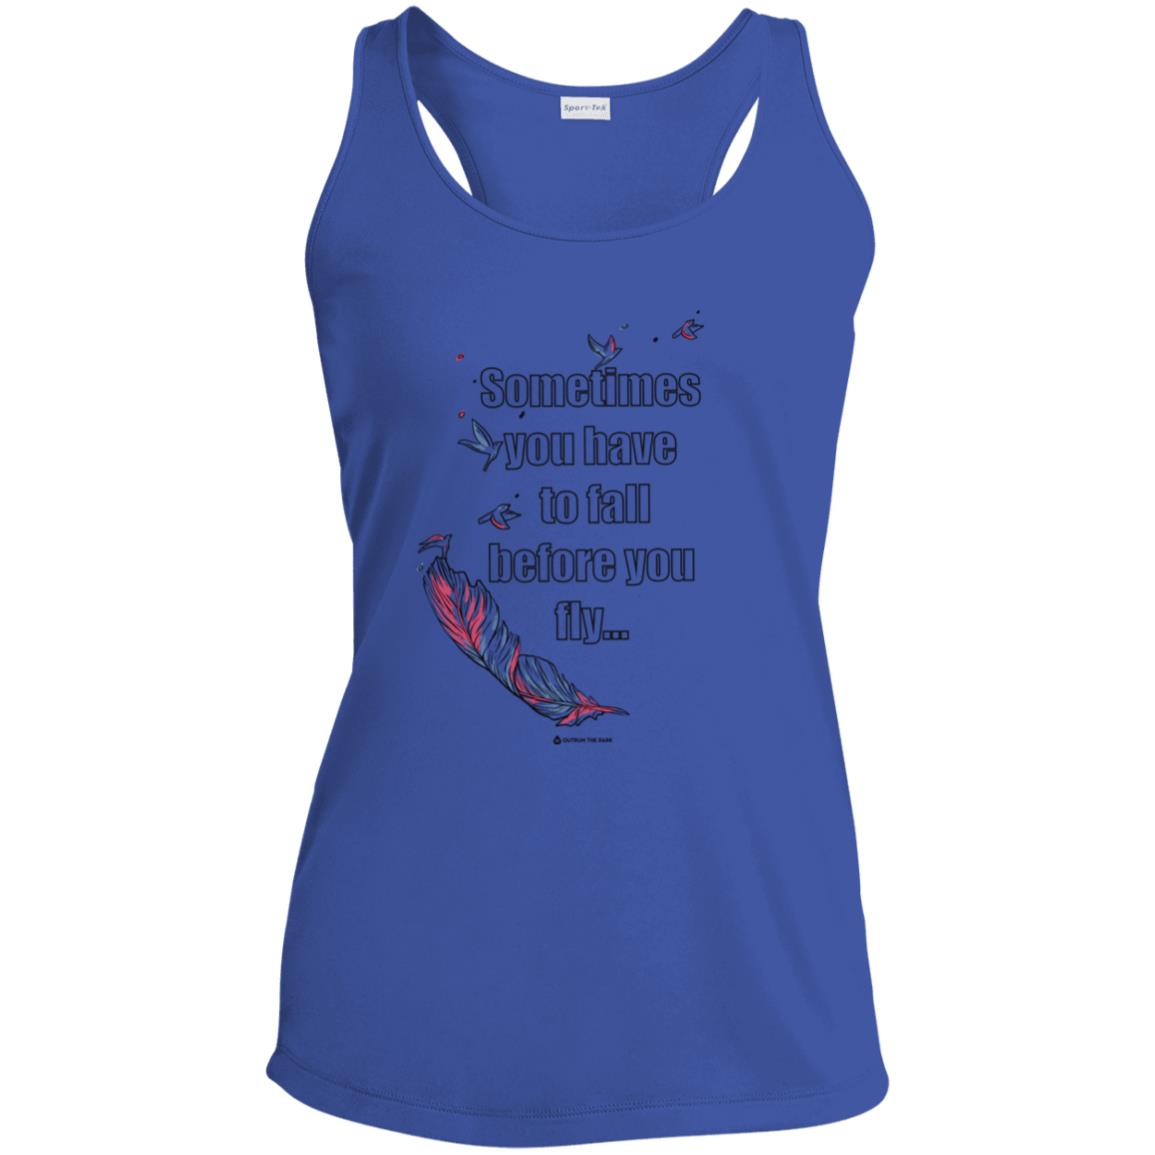 Before you fly Women's Performance Tanktop